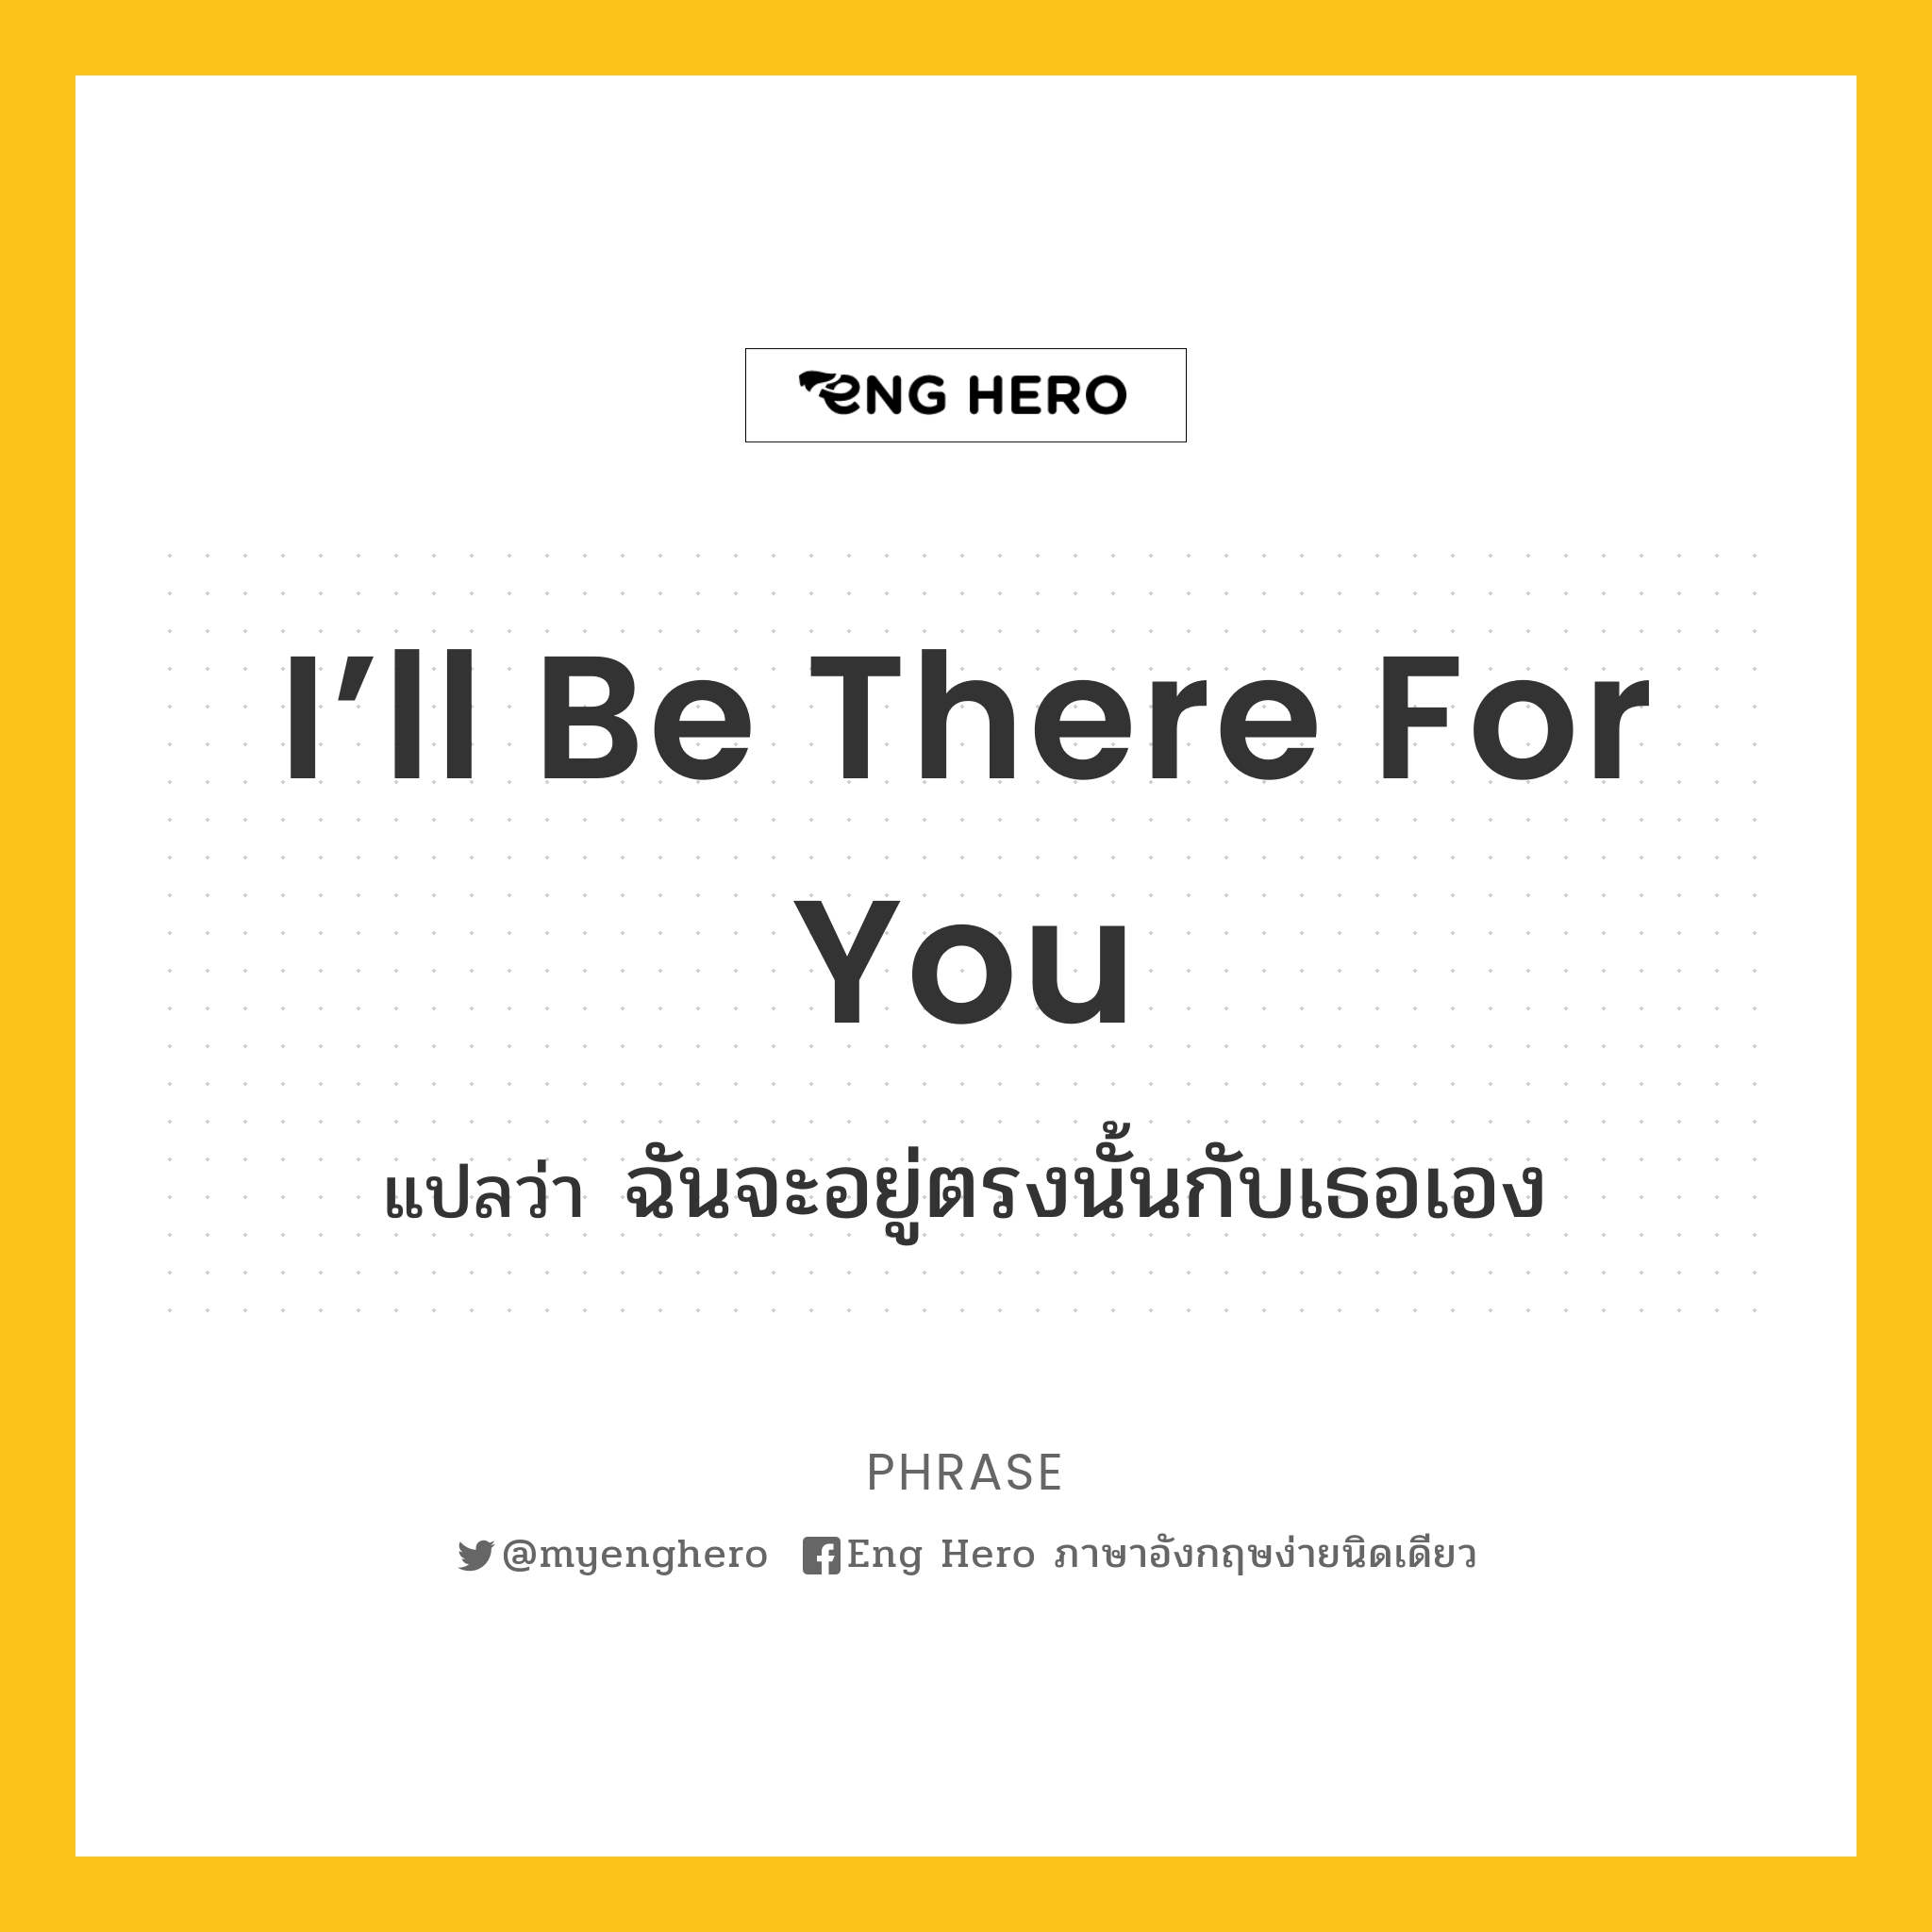 there for you แปล